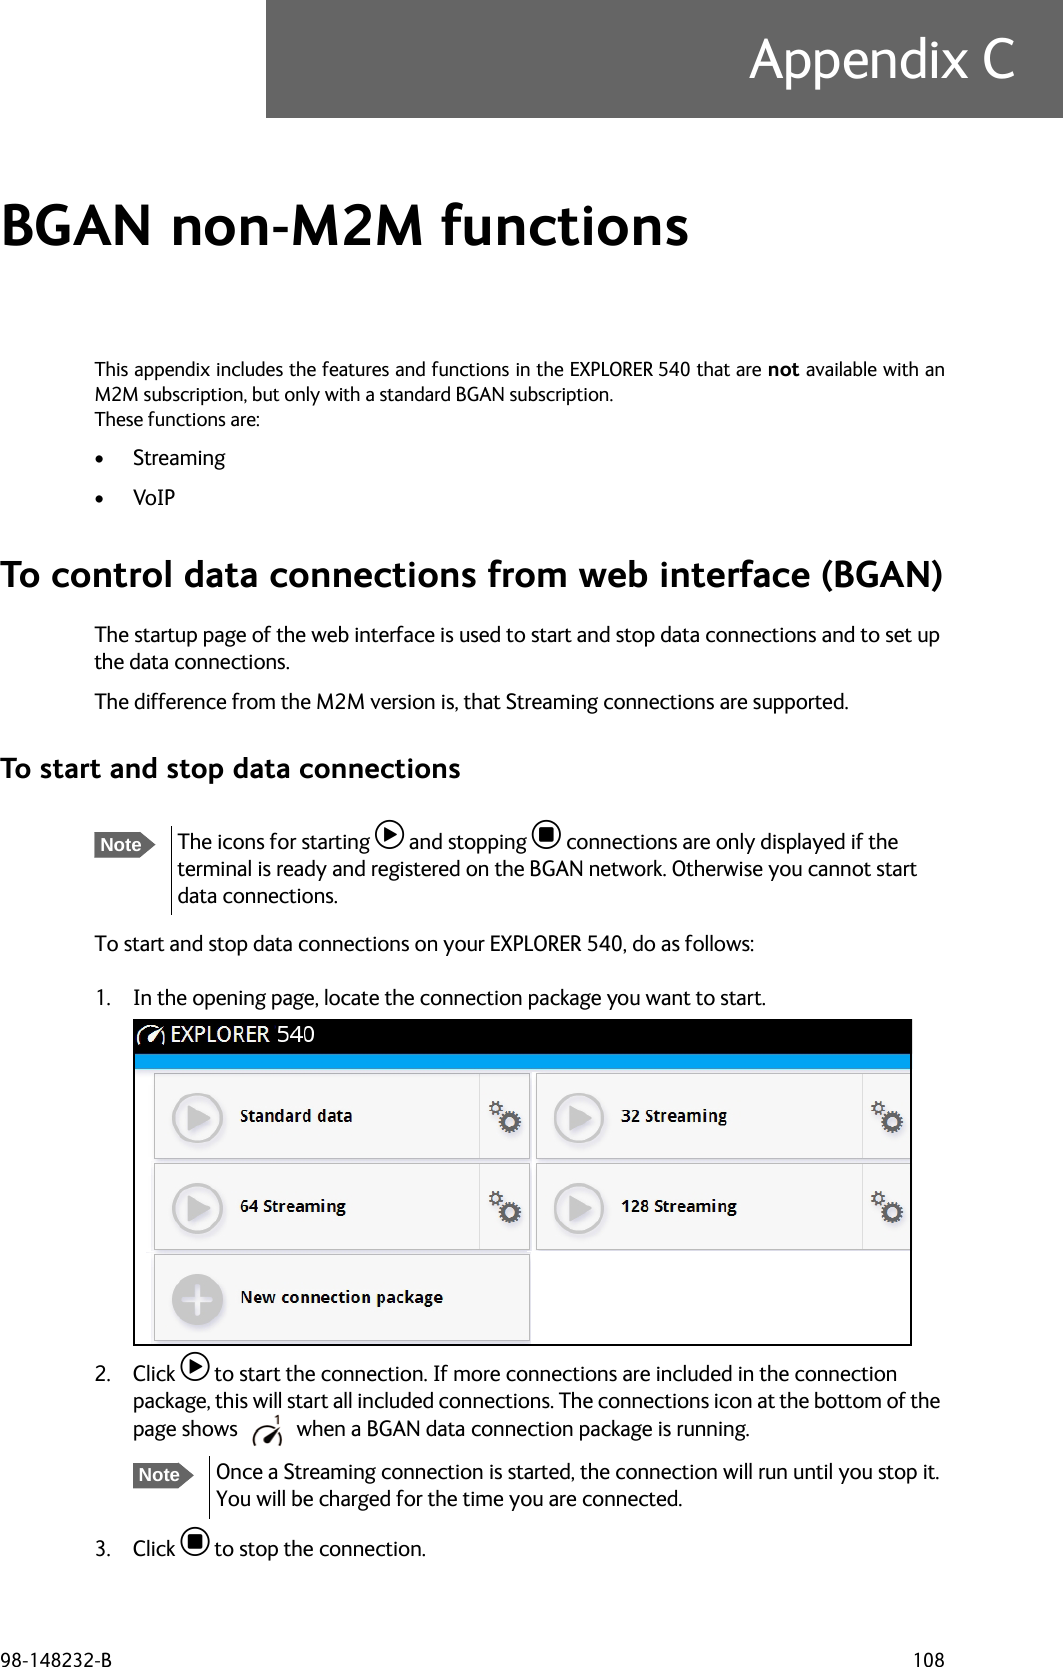 98-148232-B 108Appendix CBGAN non-M2M functions CThis appendix includes the features and functions in the EXPLORER 540 that are not available with anM2M subscription, but only with a standard BGAN subscription.These functions are:•Streaming•VoIPTo control data connections from web interface (BGAN)The startup page of the web interface is used to start and stop data connections and to set up the data connections. The difference from the M2M version is, that Streaming connections are supported.To start and stop data connectionsTo start and stop data connections on your EXPLORER 540, do as follows:1. In the opening page, locate the connection package you want to start.2. Click  to start the connection. If more connections are included in the connection package, this will start all included connections. The connections icon at the bottom of the page shows  when a BGAN data connection package is running.3. Click  to stop the connection.NoteThe icons for starting  and stopping  connections are only displayed if the terminal is ready and registered on the BGAN network. Otherwise you cannot start data connections.NoteOnce a Streaming connection is started, the connection will run until you stop it. You will be charged for the time you are connected.